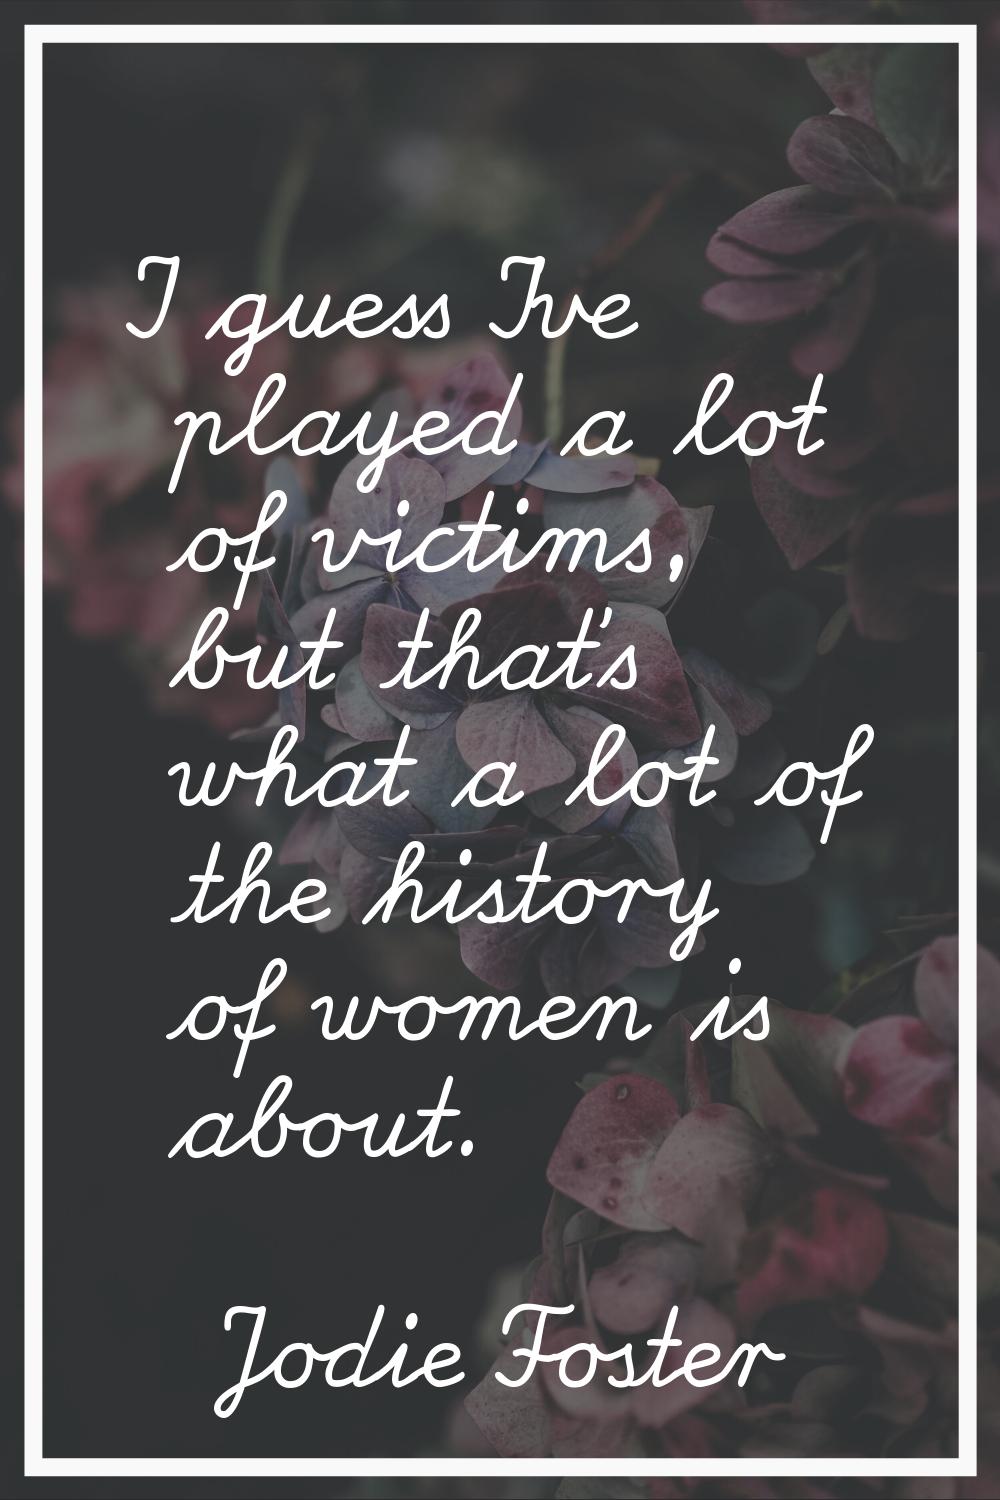 I guess I've played a lot of victims, but that's what a lot of the history of women is about.